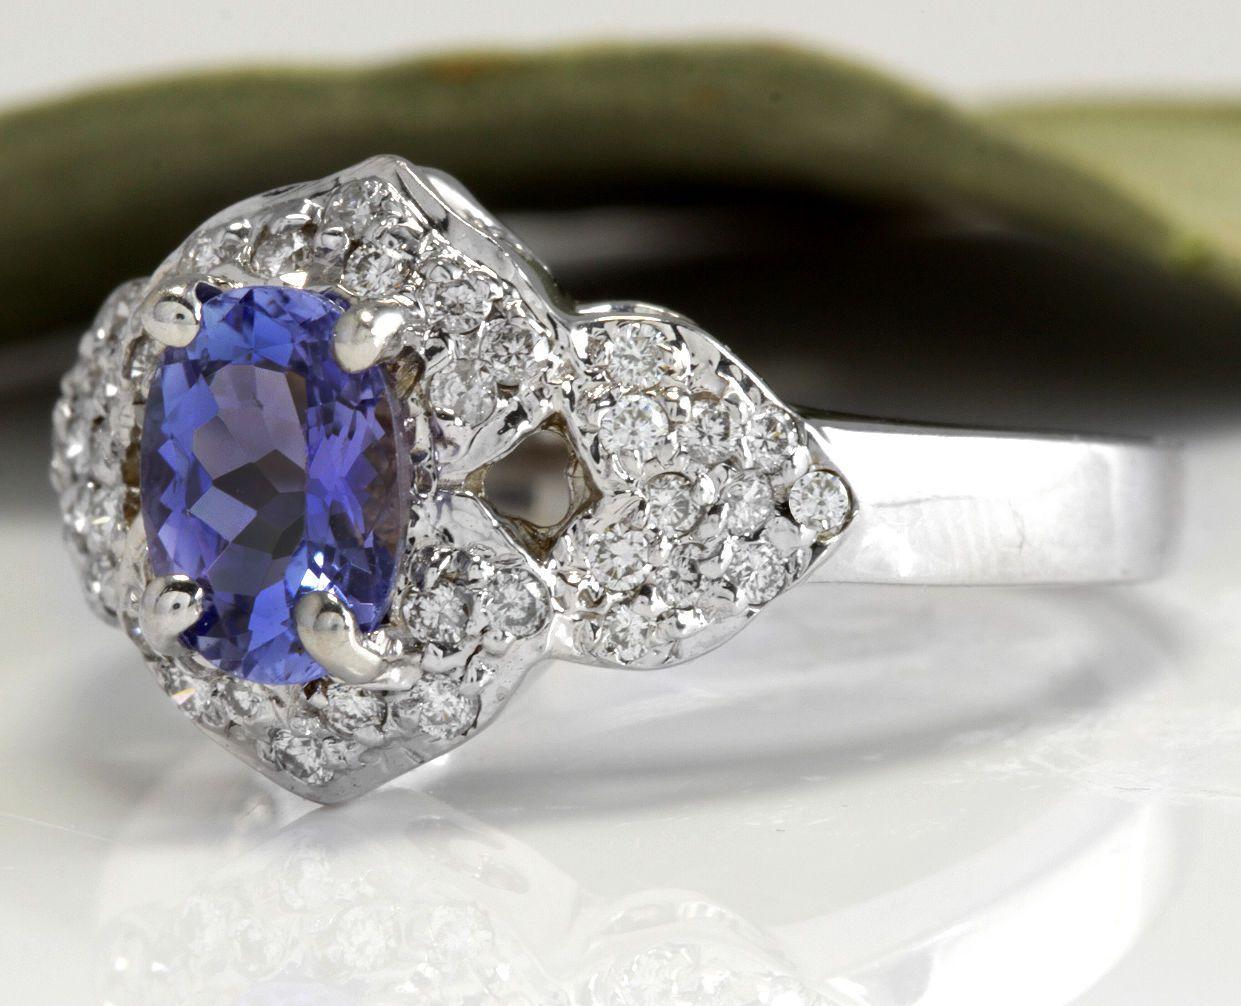 1.40 Carats Natural Very Nice Looking Tanzanite and Diamond 14K Solid White Gold Ring

Total Natural Oval Cut Tanzanite Weight is: 1.00 Carats

Natural Round Diamonds Weight: .40 Carats (color F-G / Clarity VS2-SI1)

Ring size: 6 (we offer free